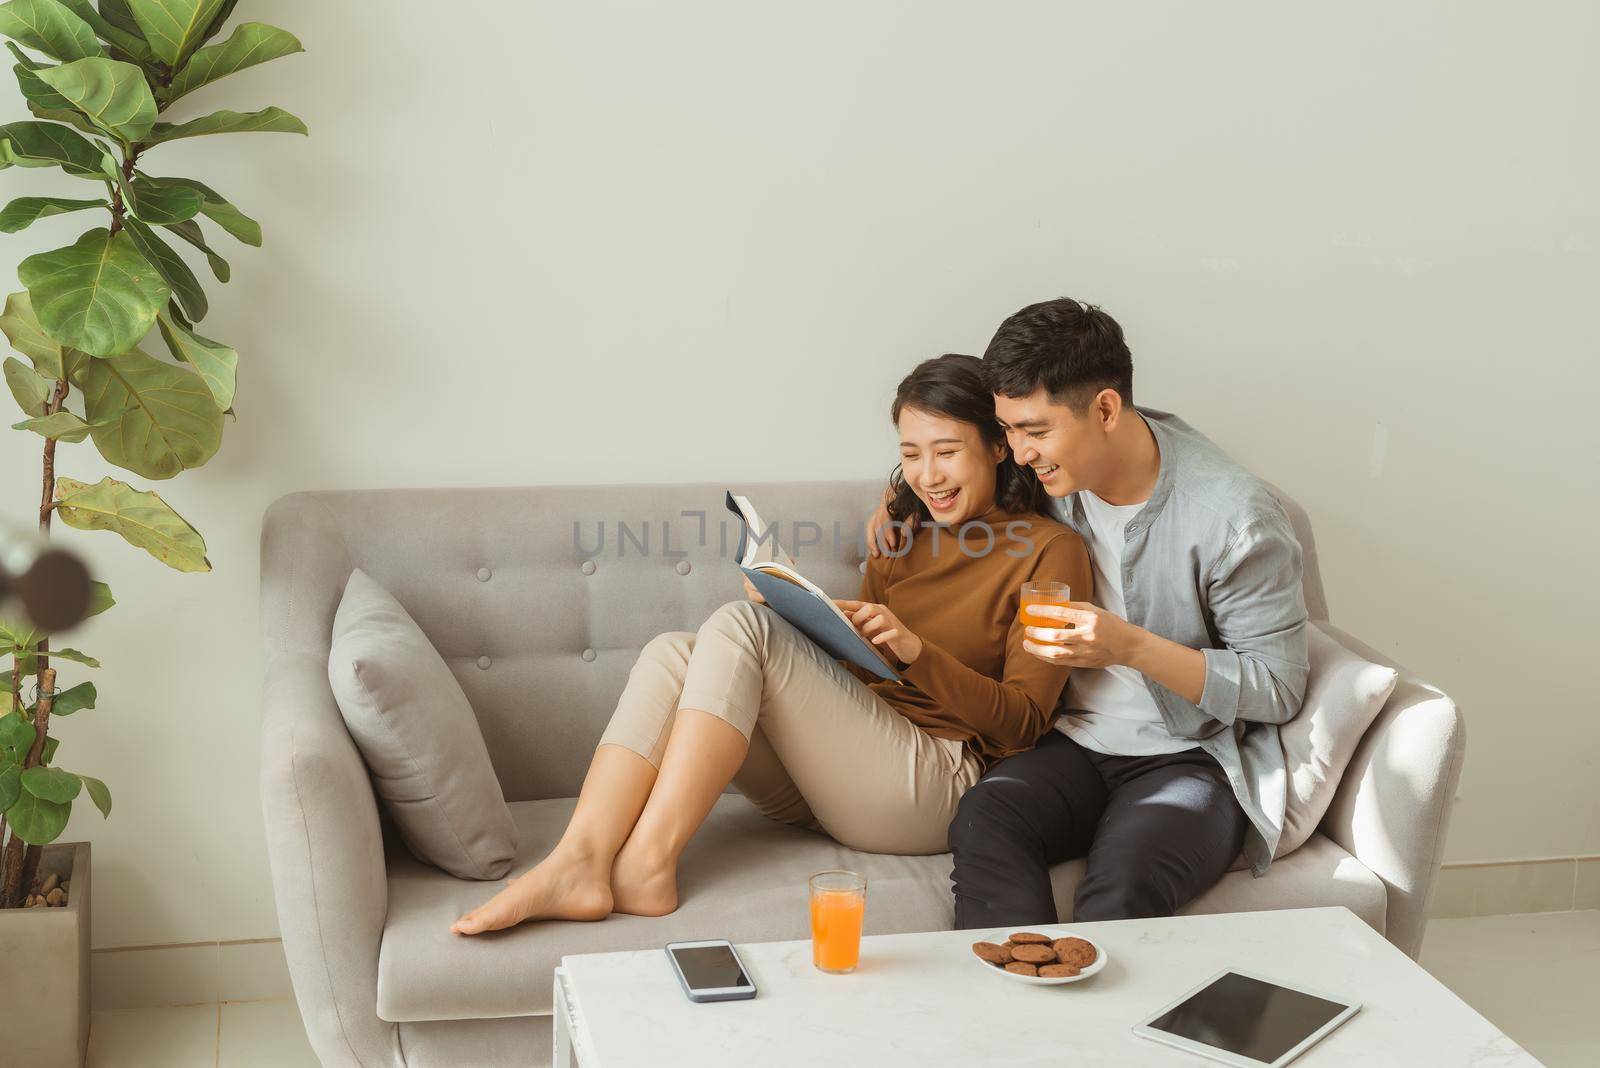 Lovely couple relaxing on couch